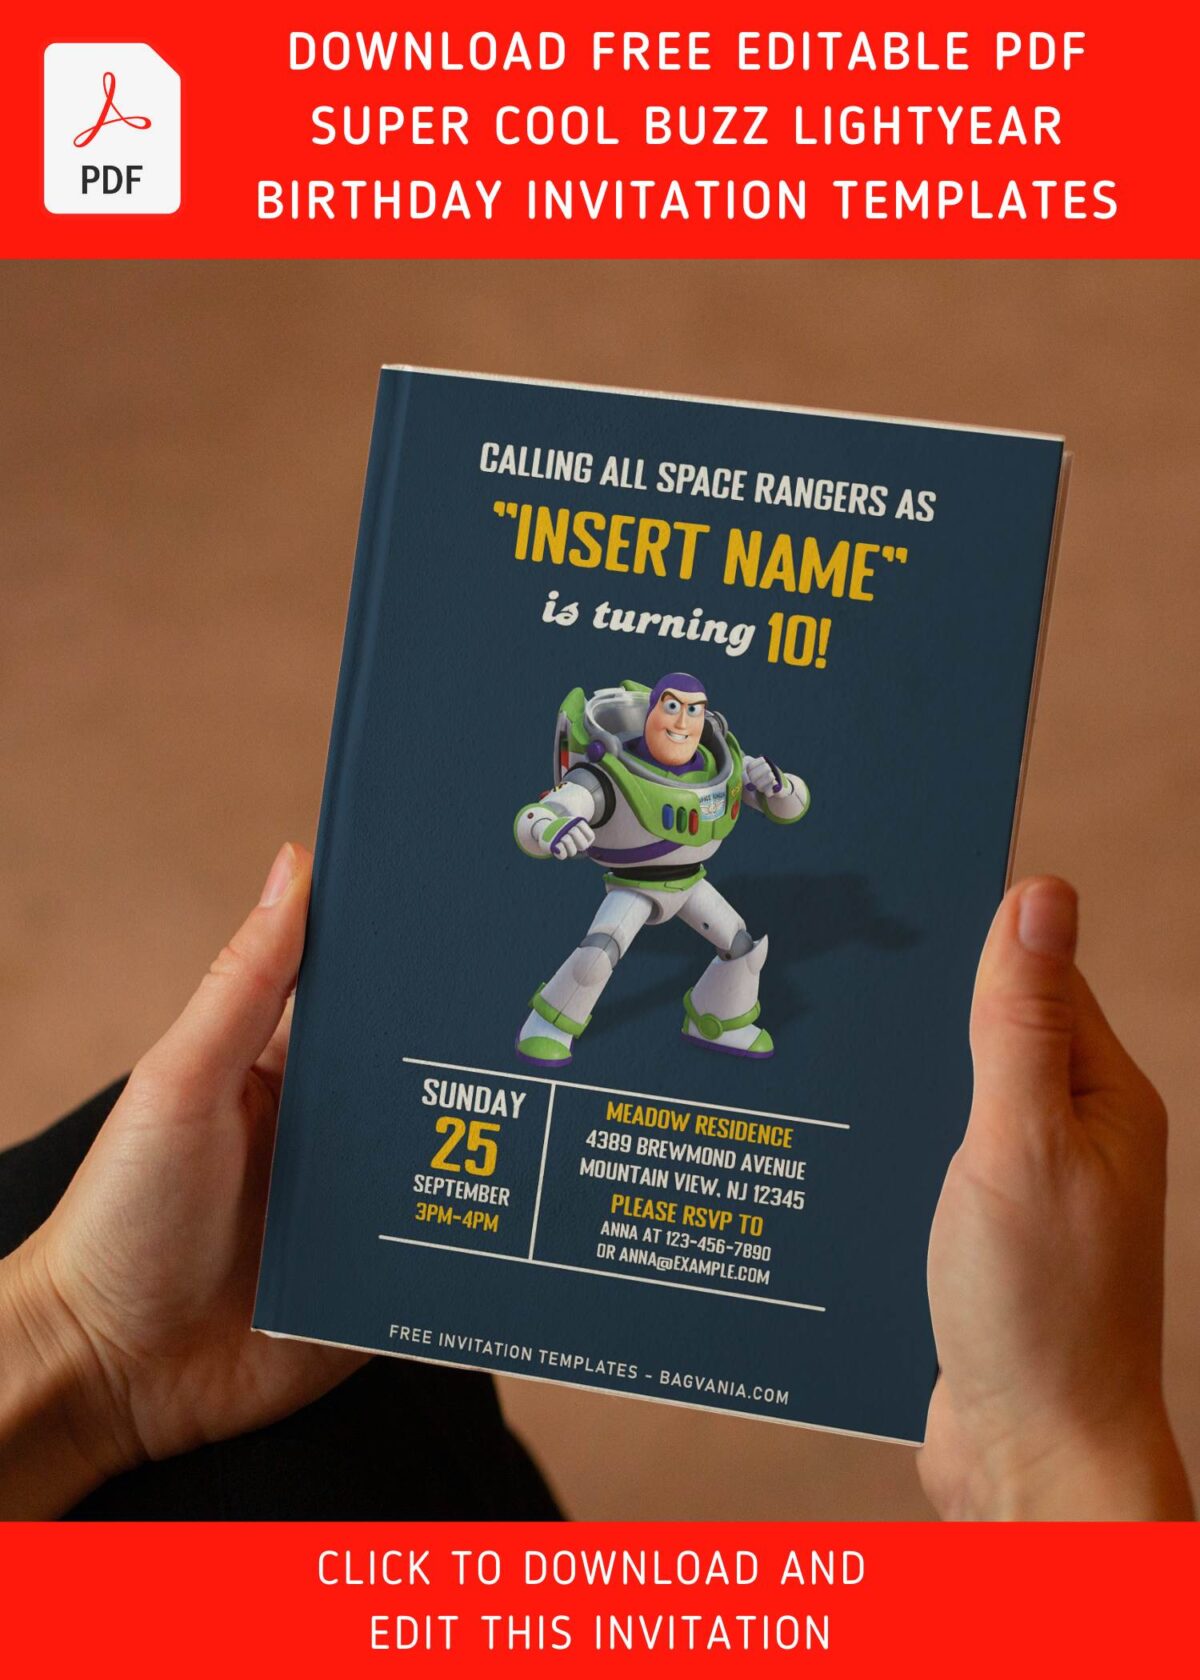 (Free Editable PDF) Simple Space Ranger Buzz Lightyear Boy Birthday Invitation Templates with awesome Buzz lightyear graphic